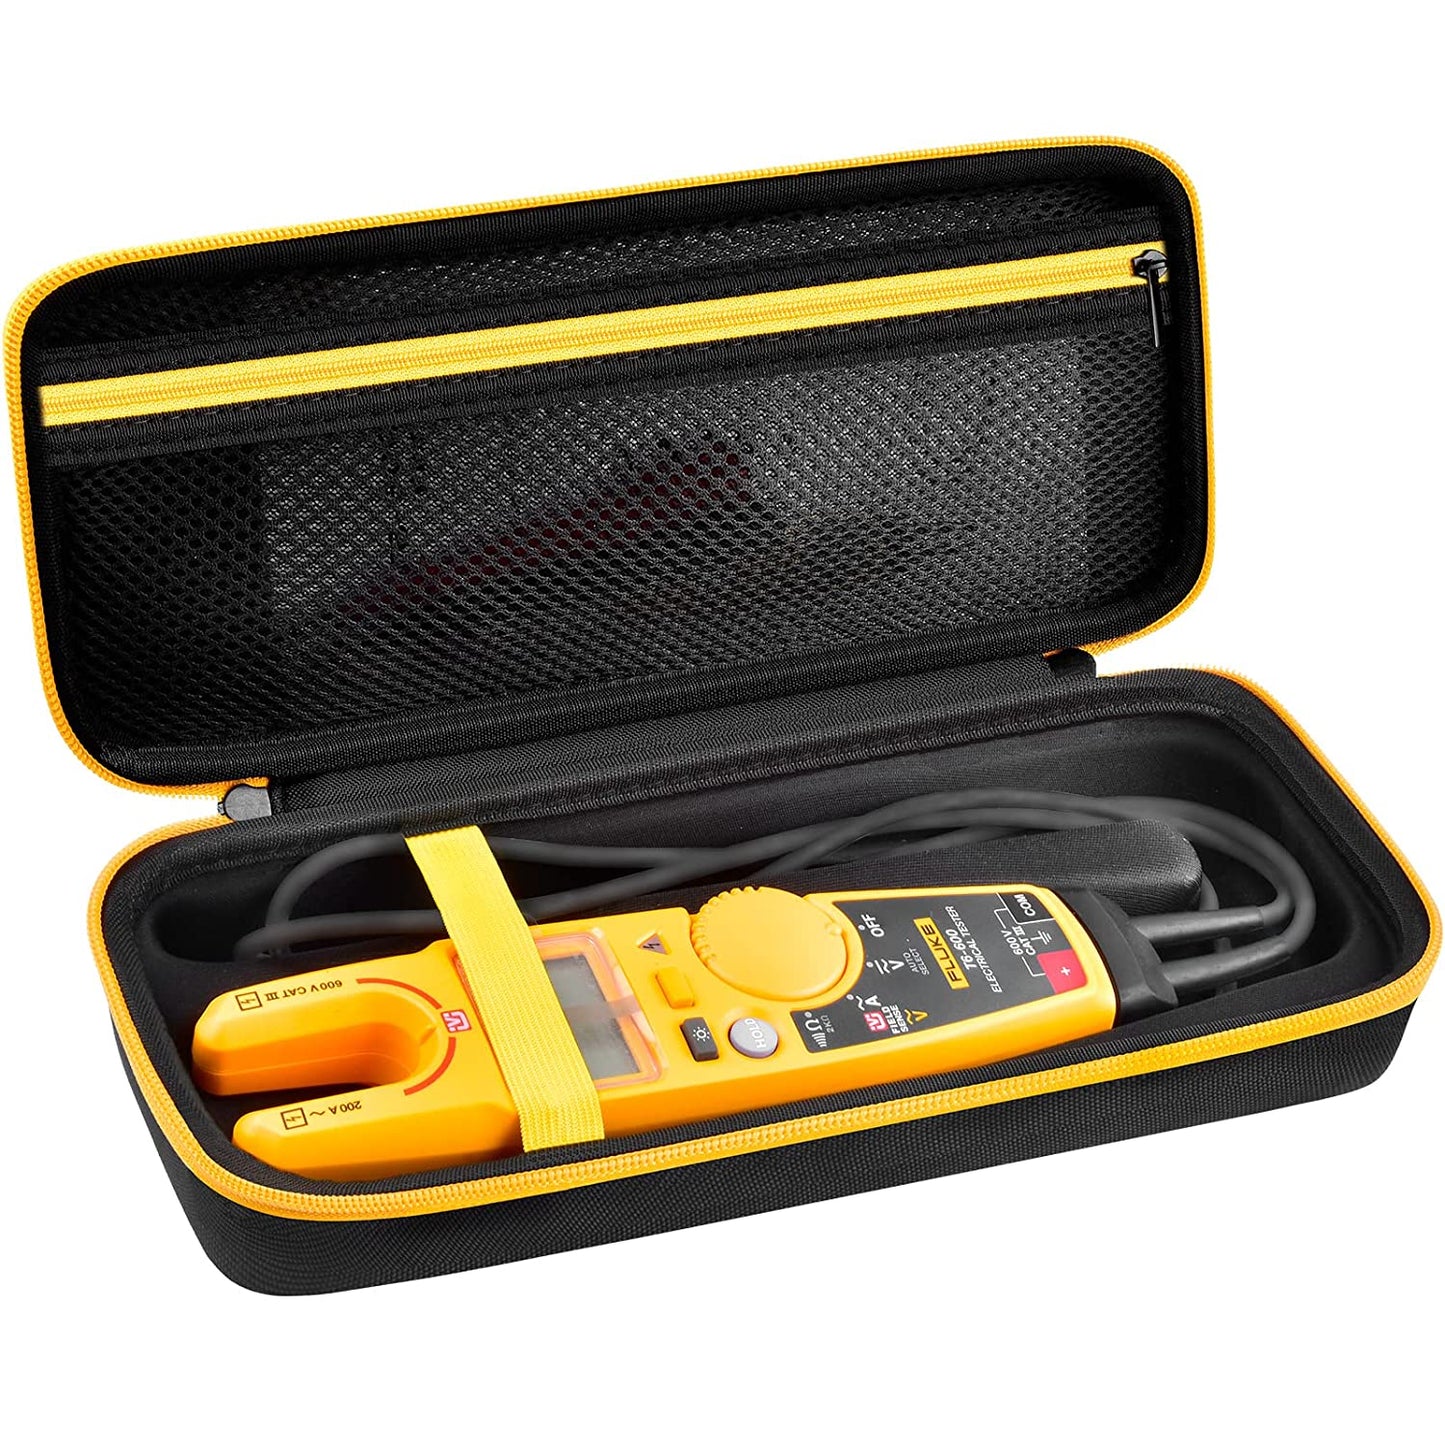 Case Compatible with Fluke T5-1000/ T5 600/ T6-1000/ T6 600 Electrical Voltage, Continuity and Current Tester Meter - Black (Box Only)